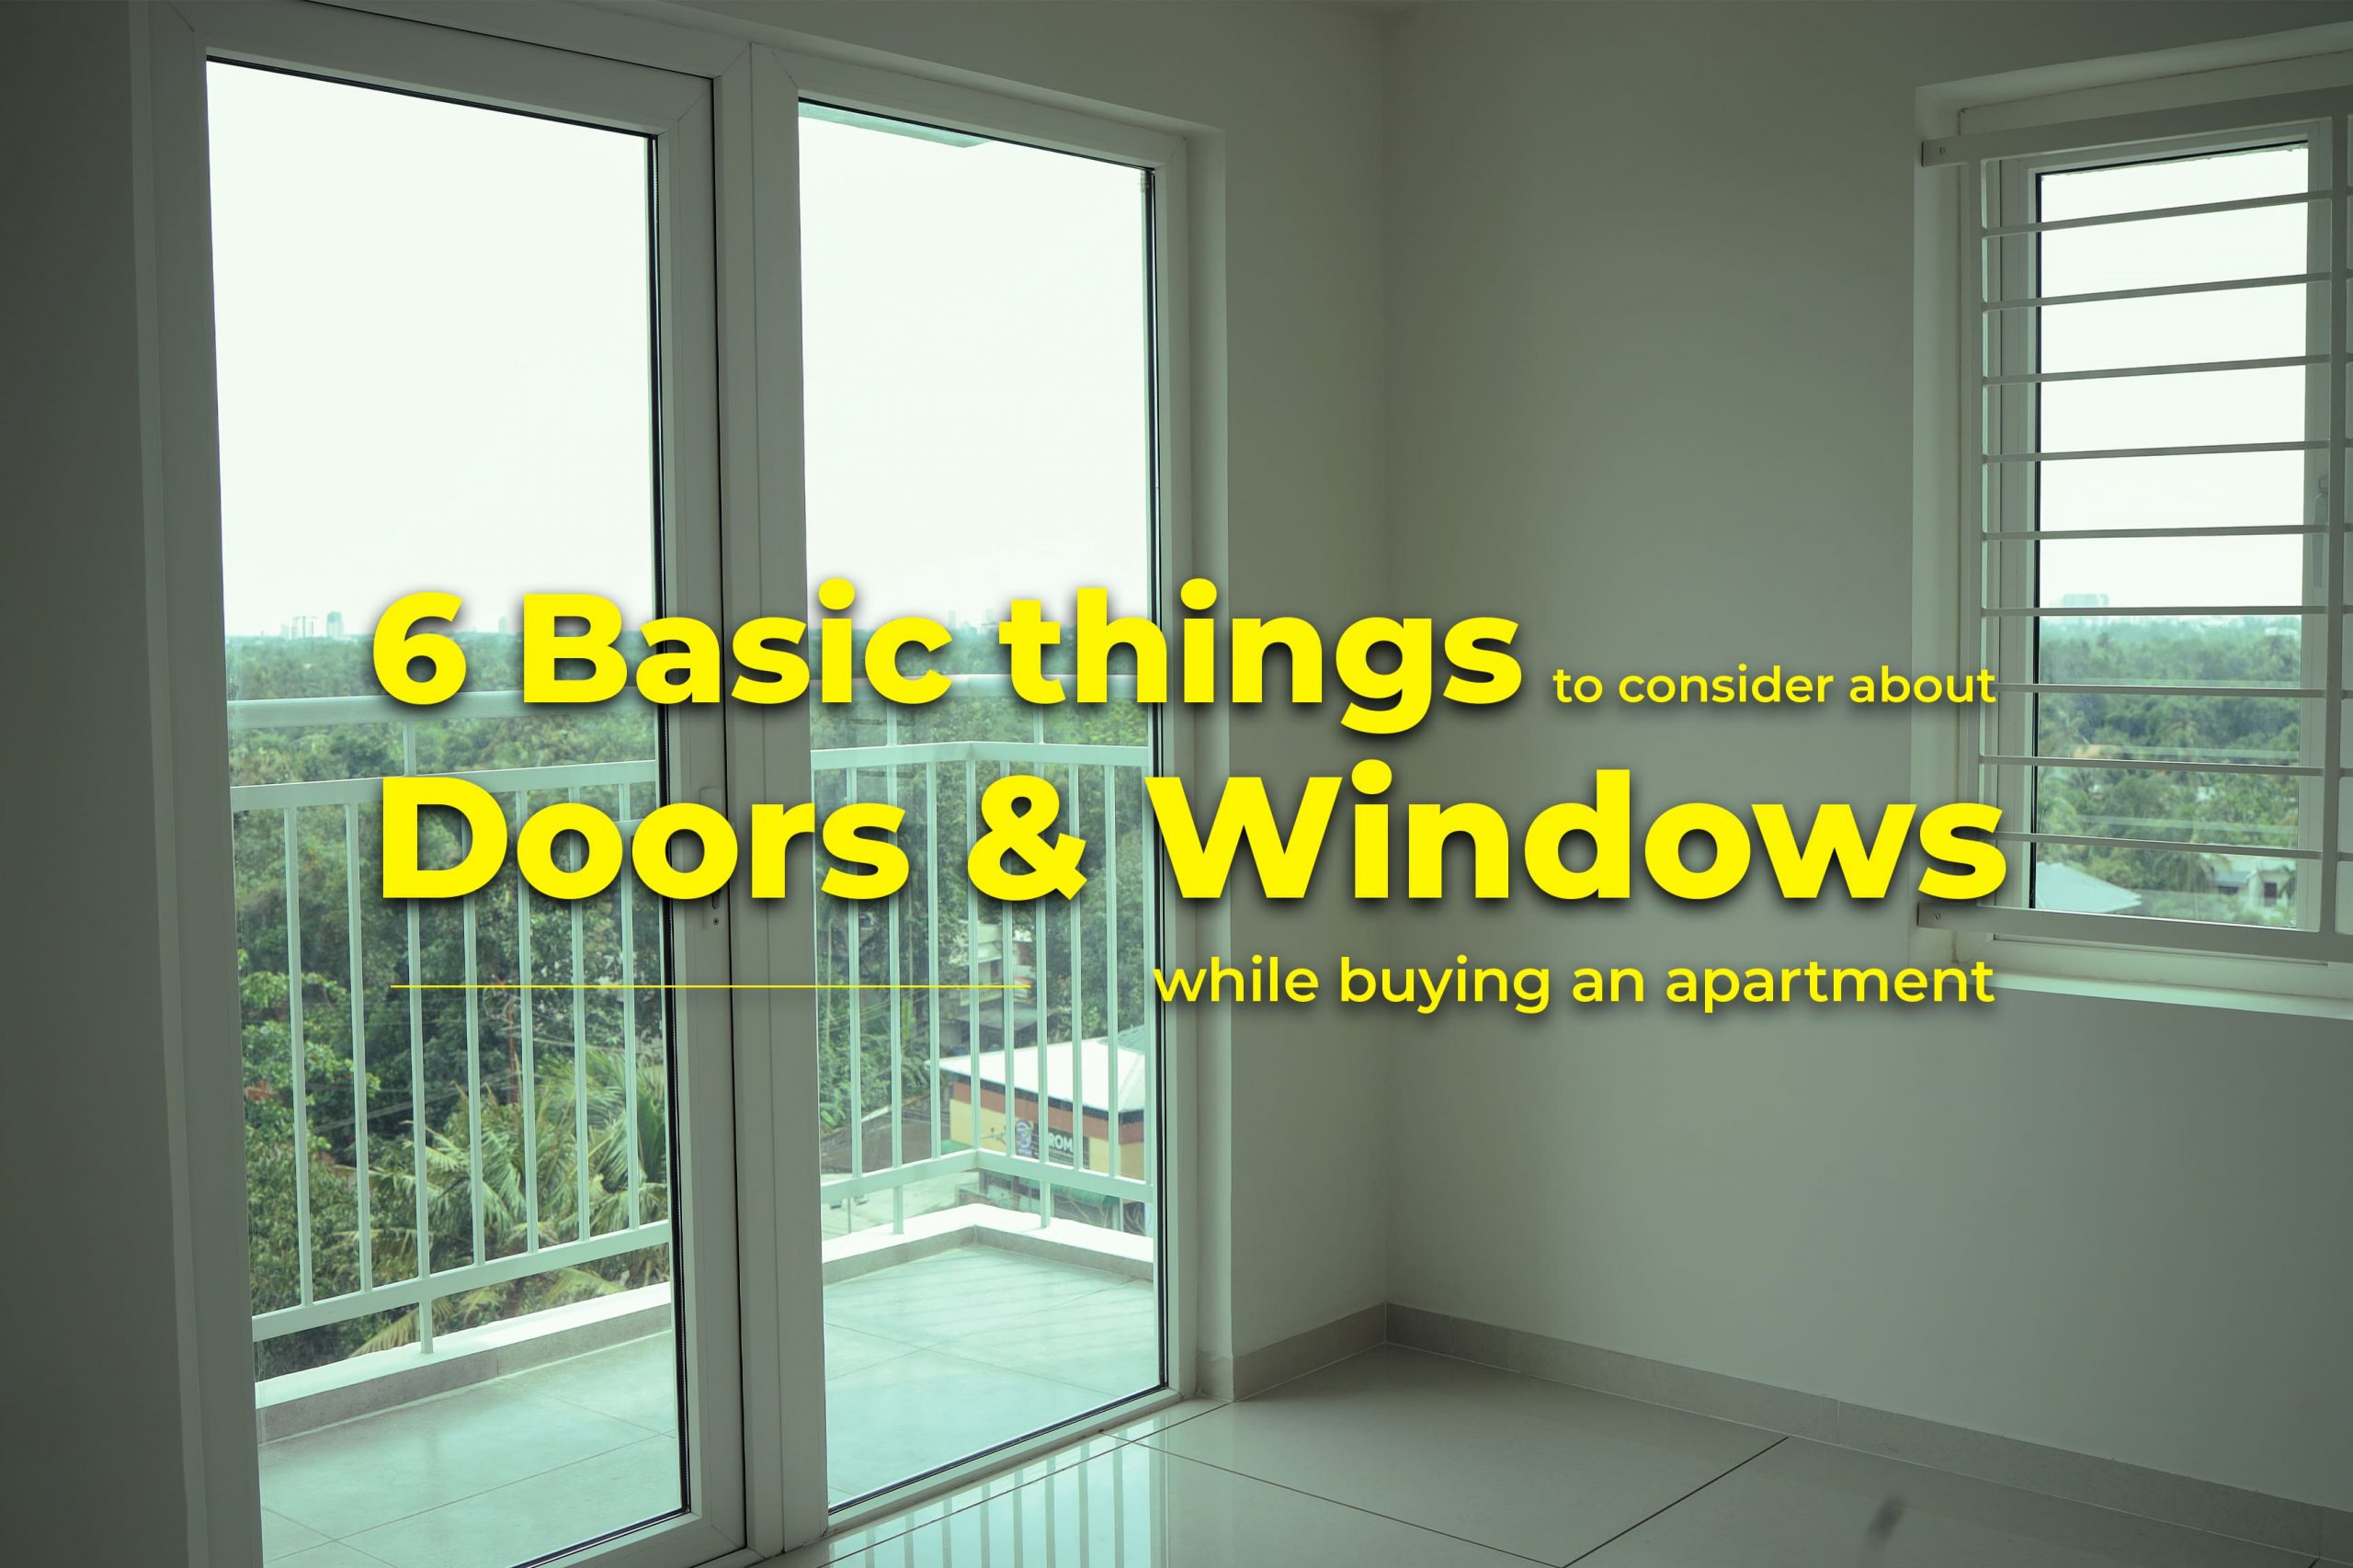 6 Basic things to consider about Doors & Windows while buying an apartment<